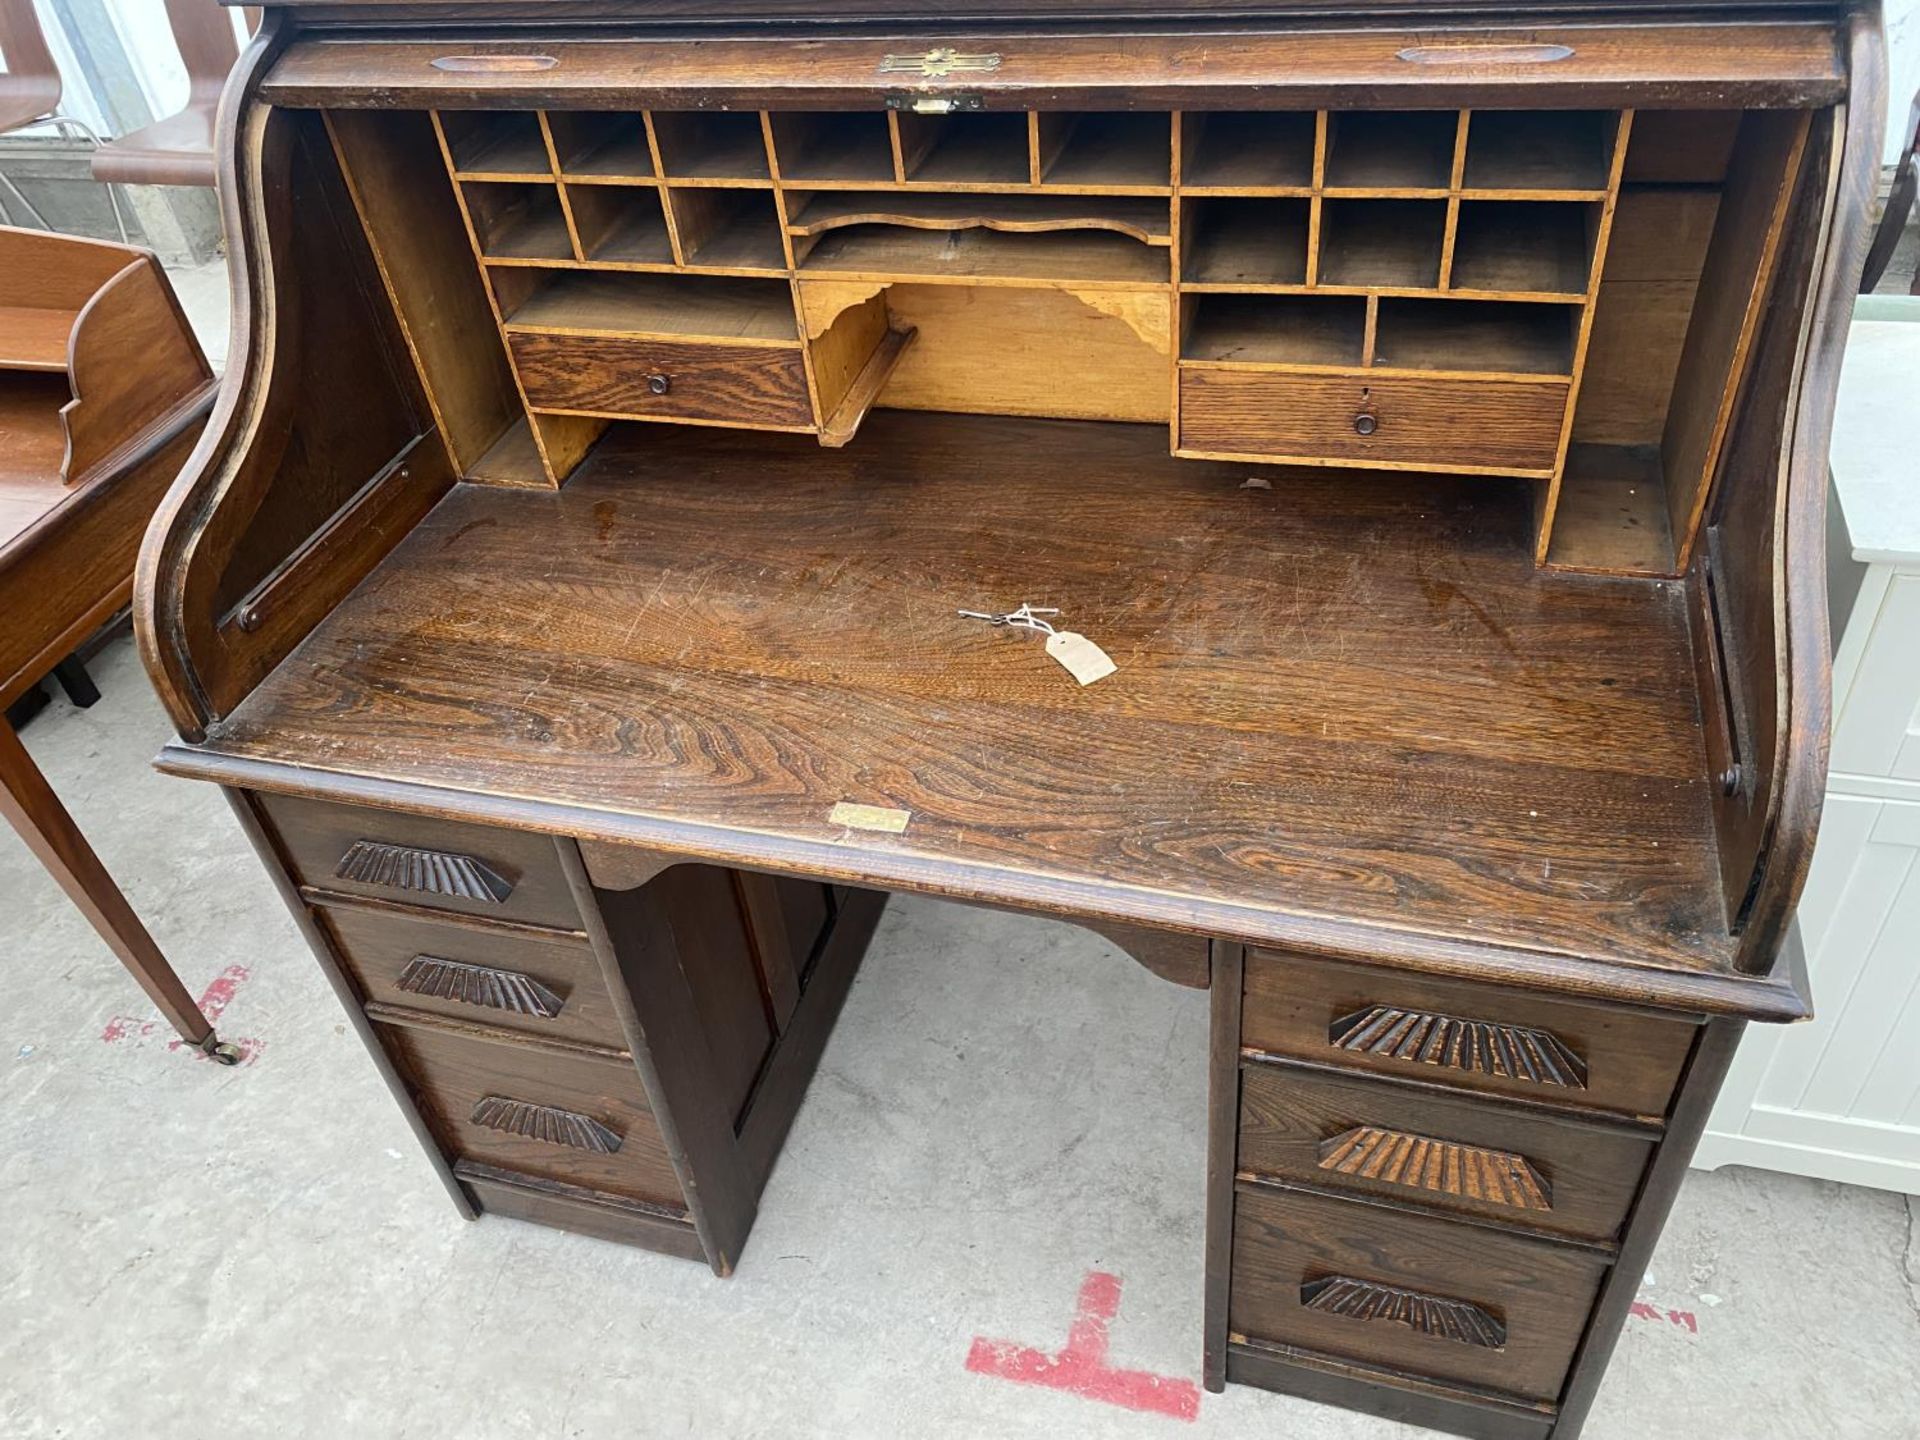 AN EARLY 20TH CENTURY OAK TWIN PEDESTAL ROLL TOP DESK WITH SIX DRAWERS, COMPLETE WITH KEY - Image 5 of 7